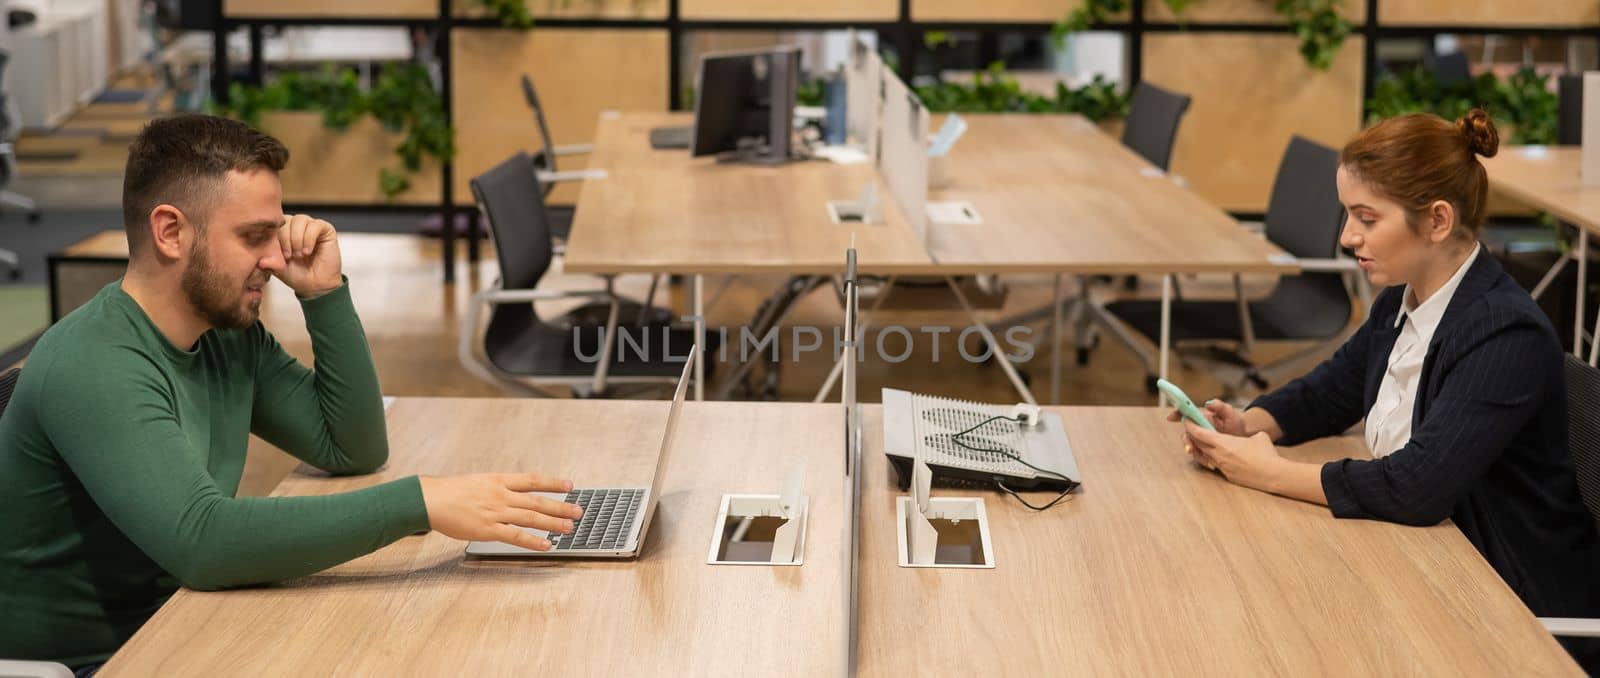 Red-haired caucasian woman uses a smartphone and a bearded man works behind a laptop in an open space office. by mrwed54